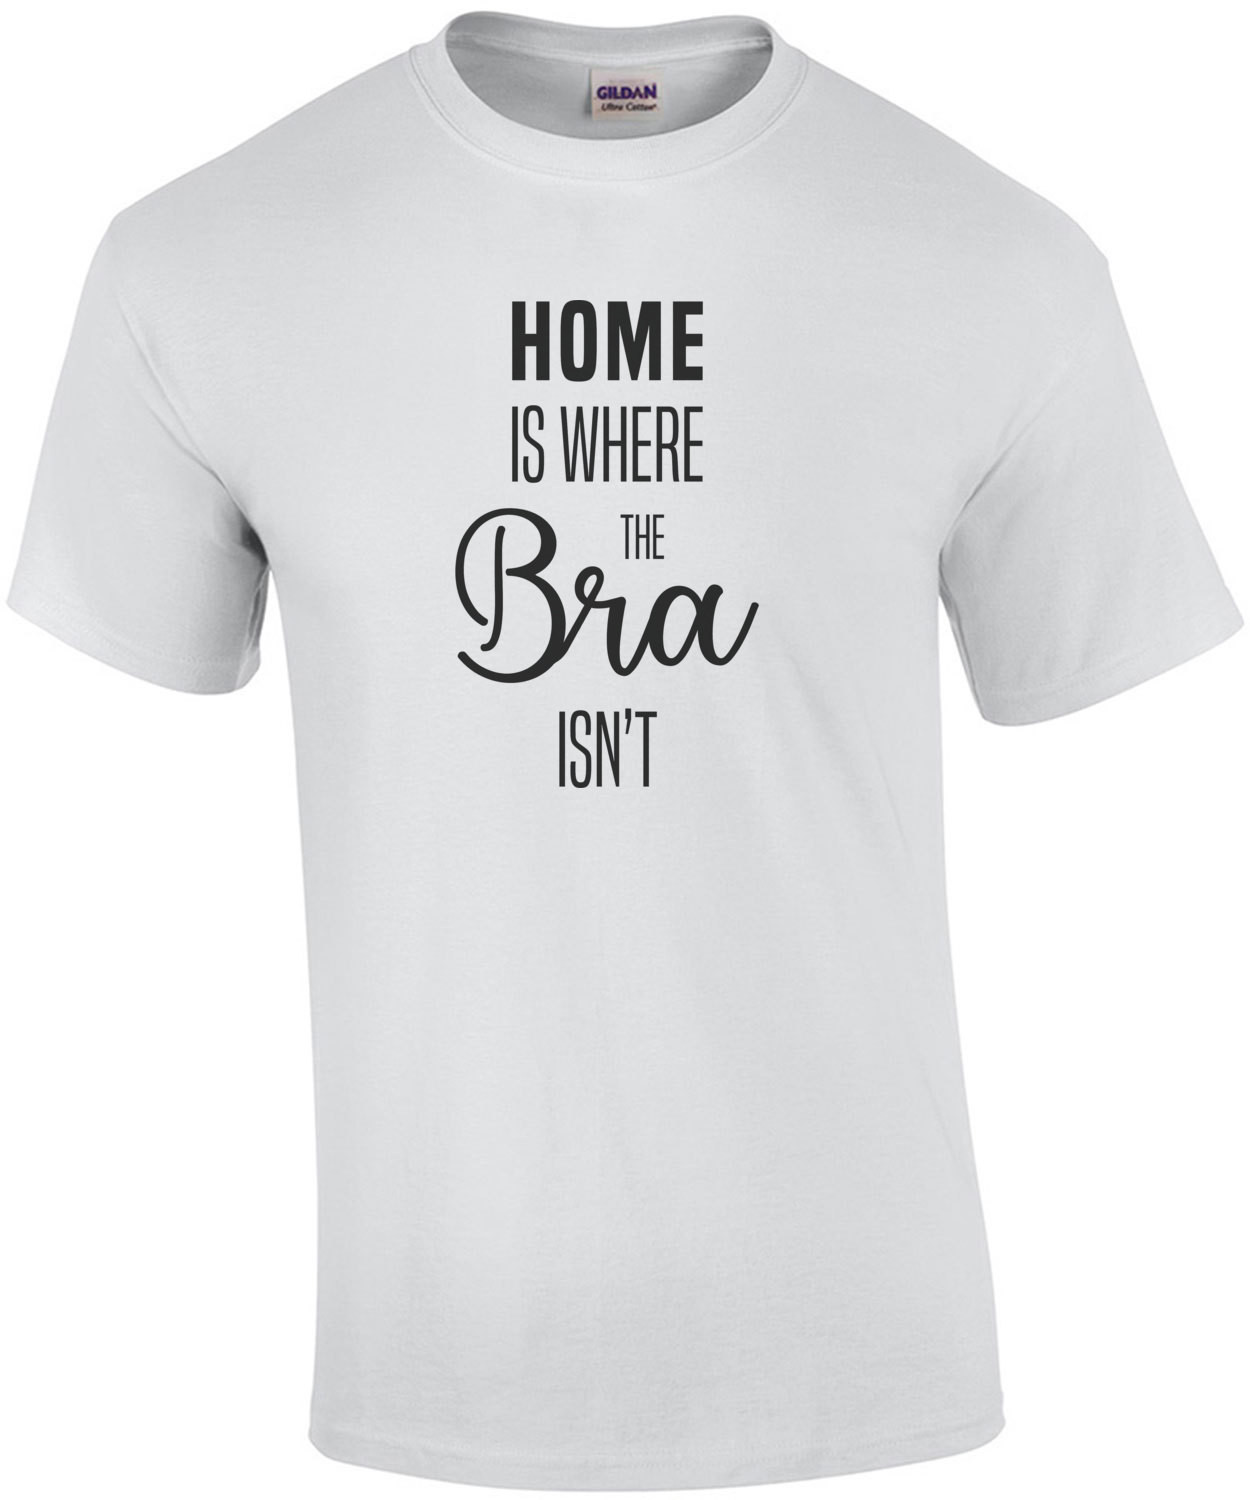 Home is where the bra isn't - funny ladies t-shirt